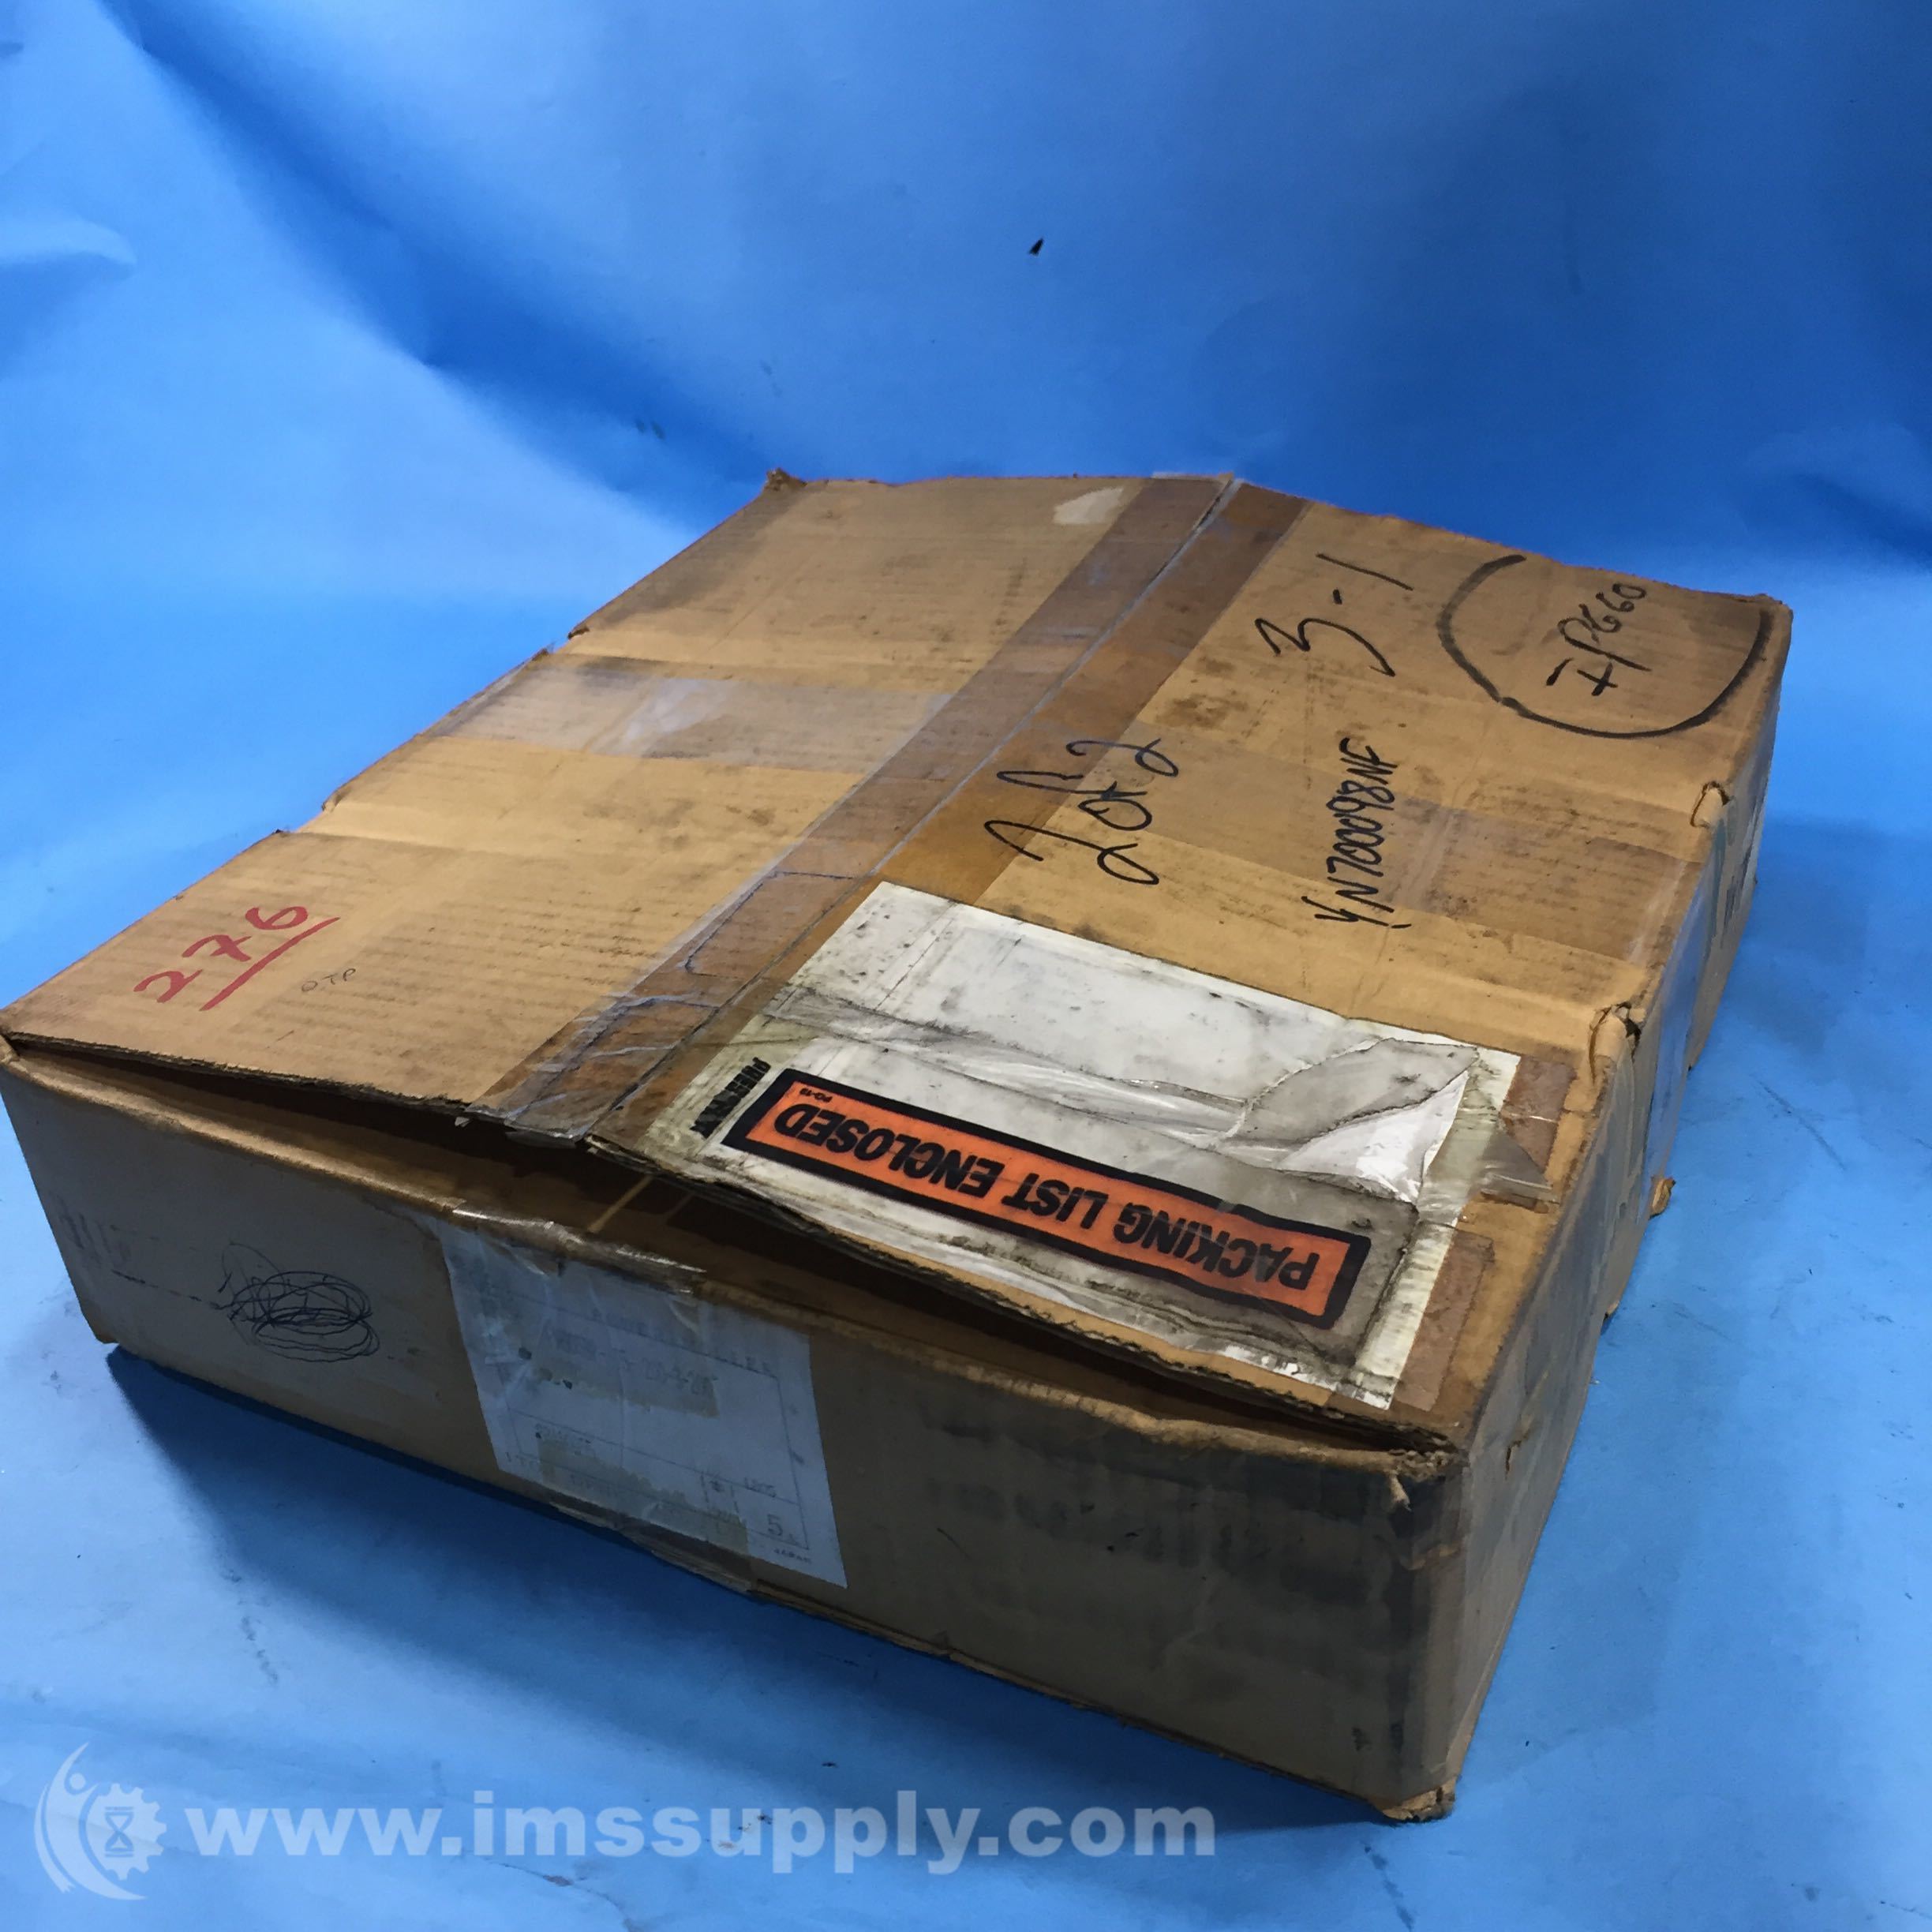 Details about   Itoh Denki PM605BP-15-200-3-200 Box of 3 Conveyor Rollers FNOB 